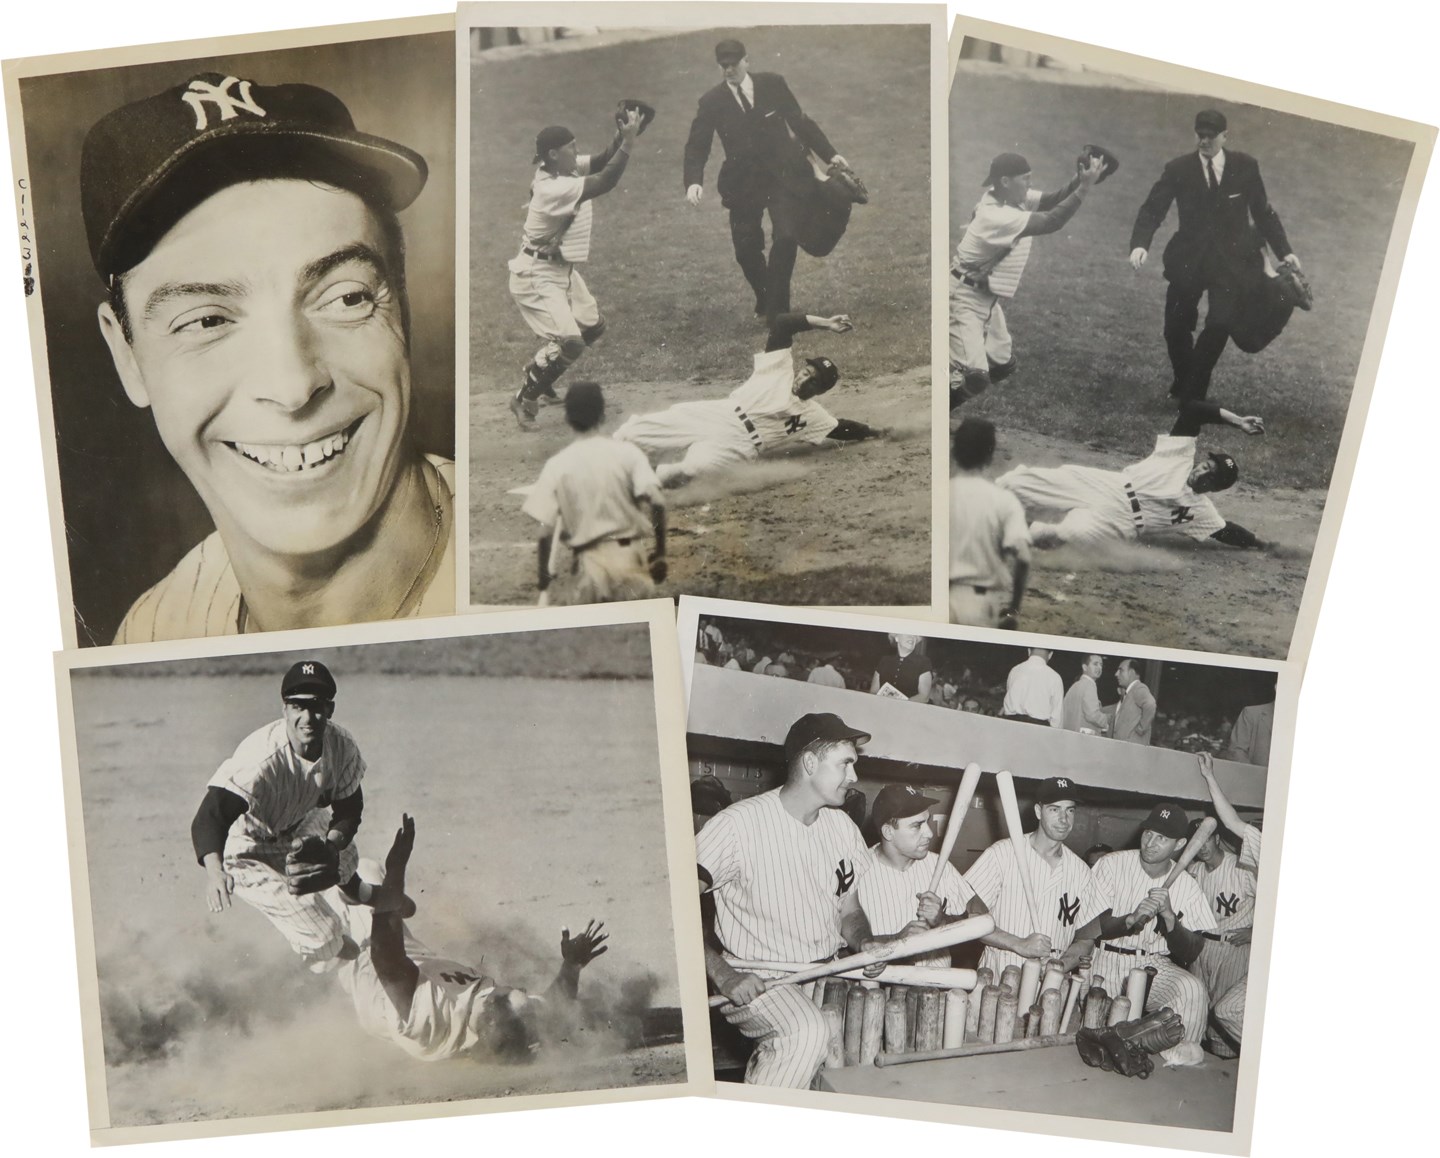 Vintage Sports Photographs - Vintage 1940s New York Yankees Photograph Collection (21)